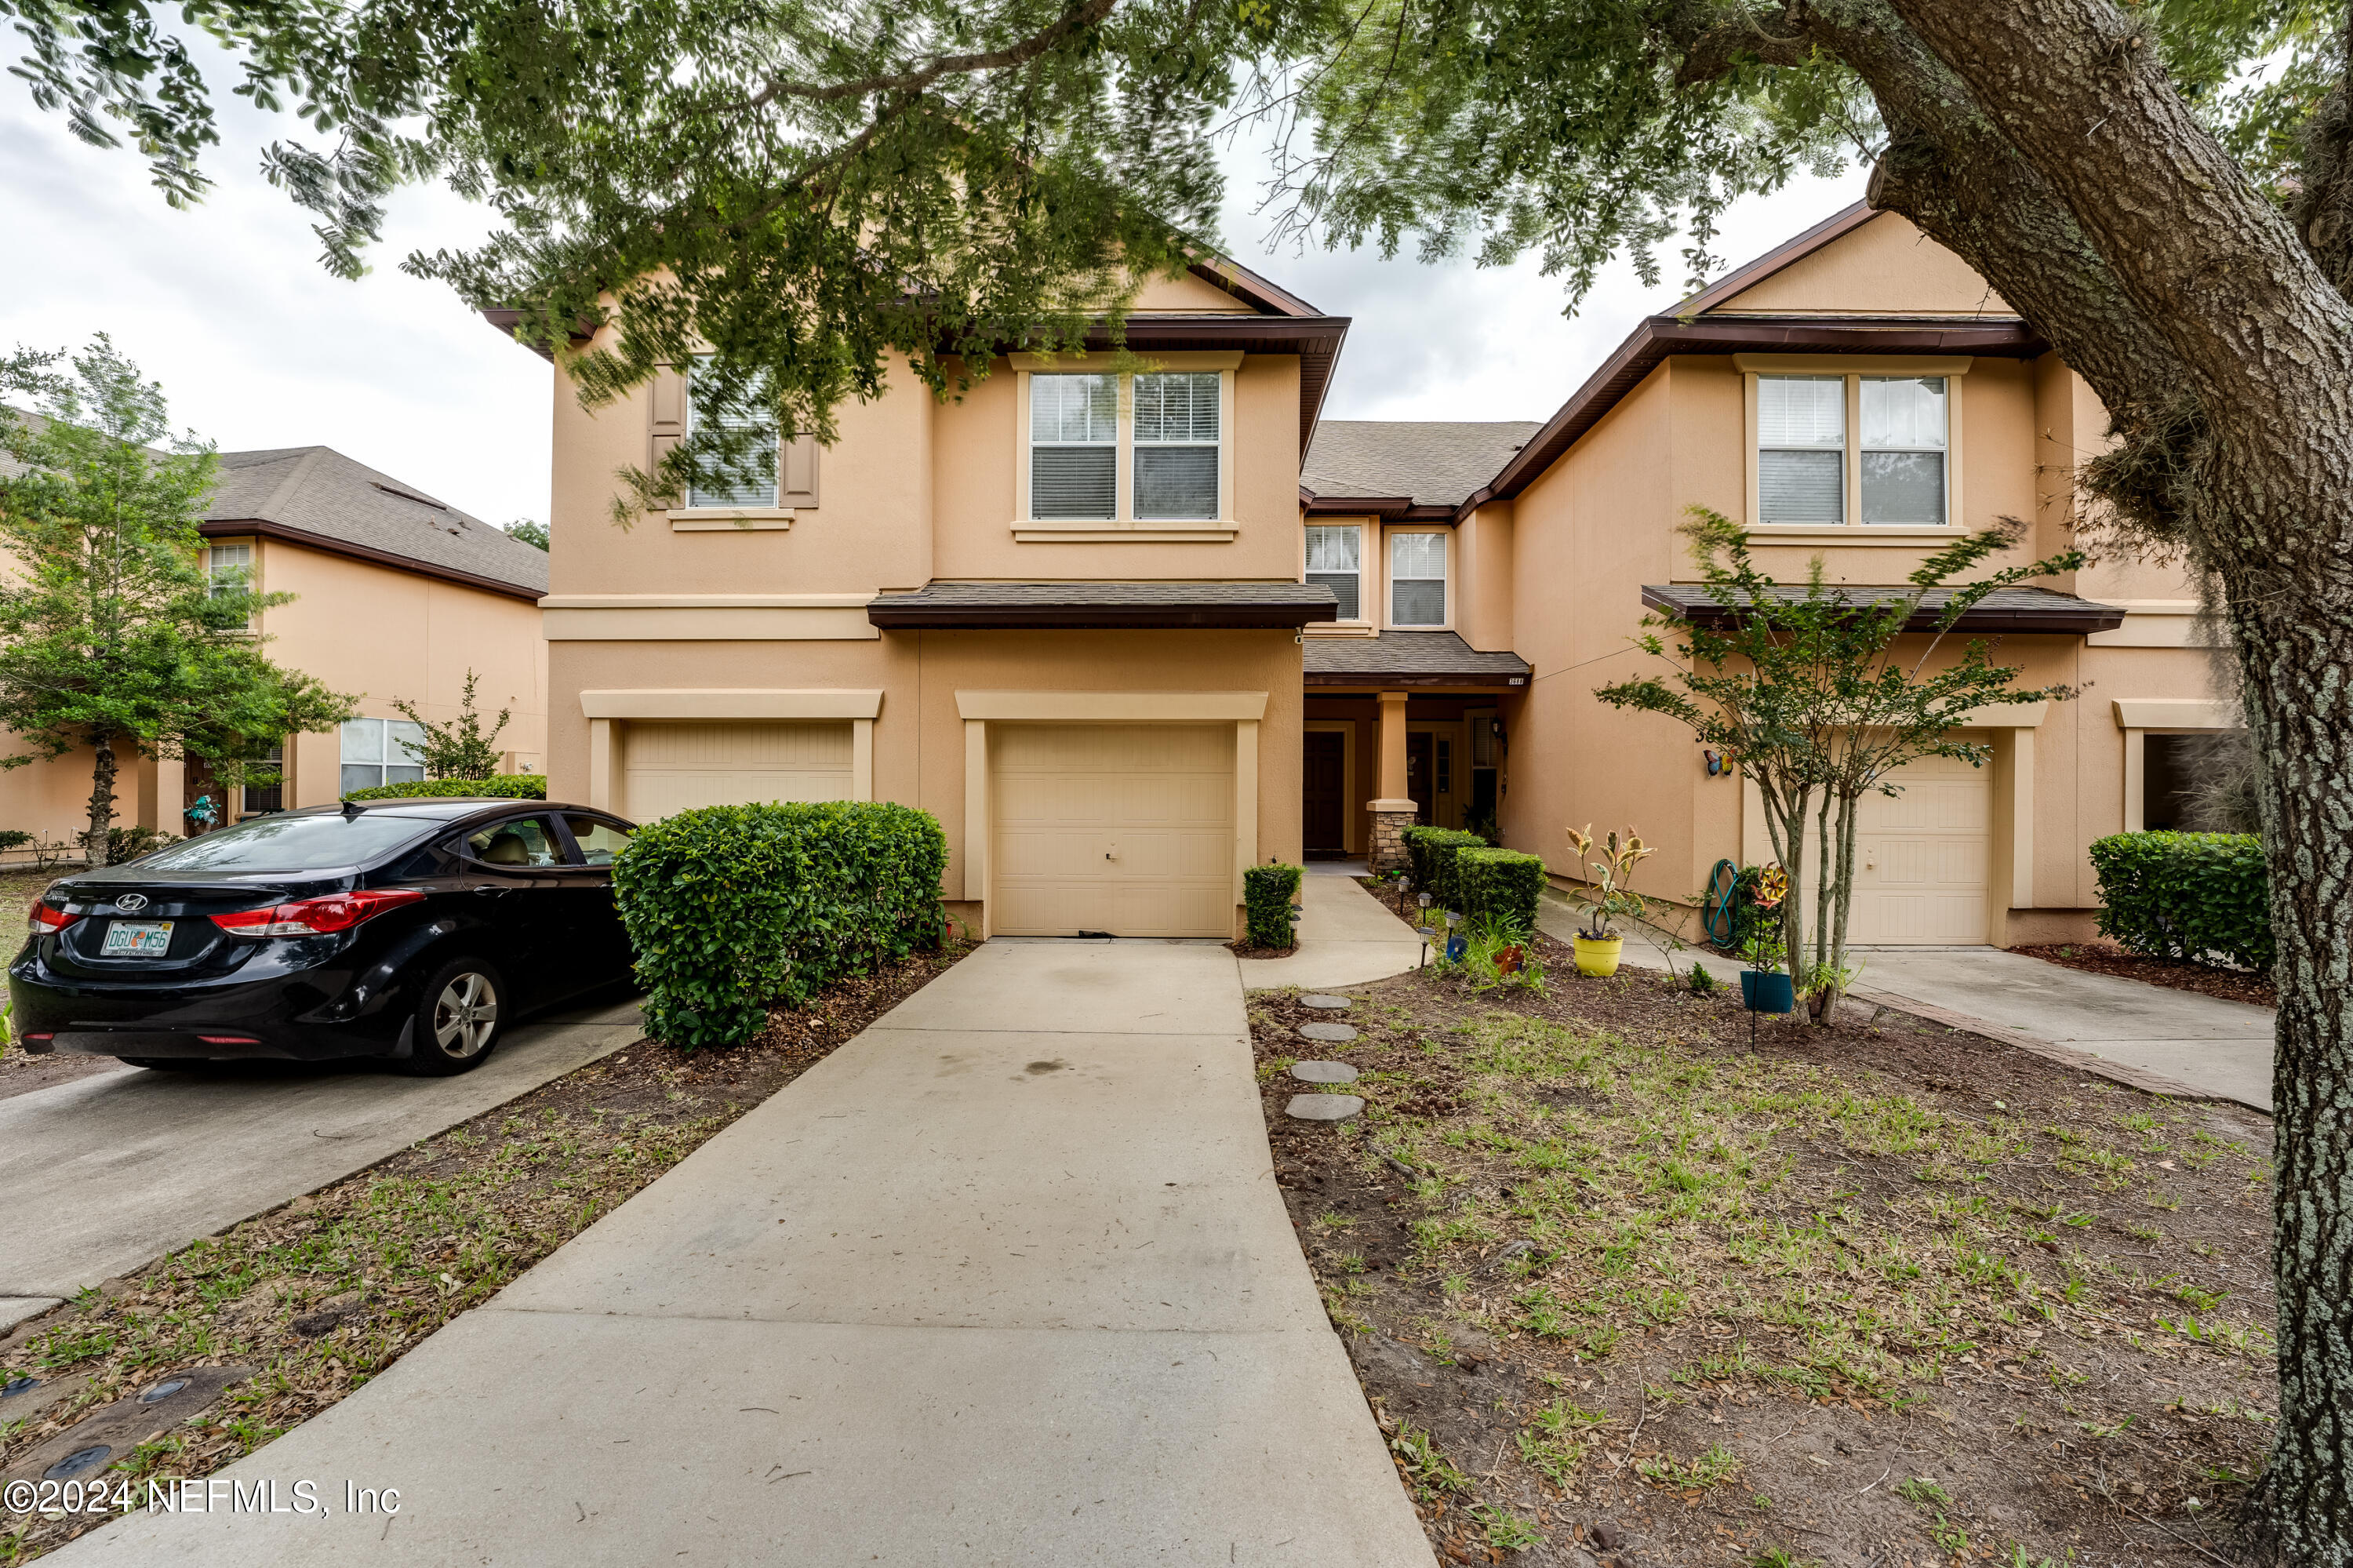 View Jacksonville, FL 32277 townhome